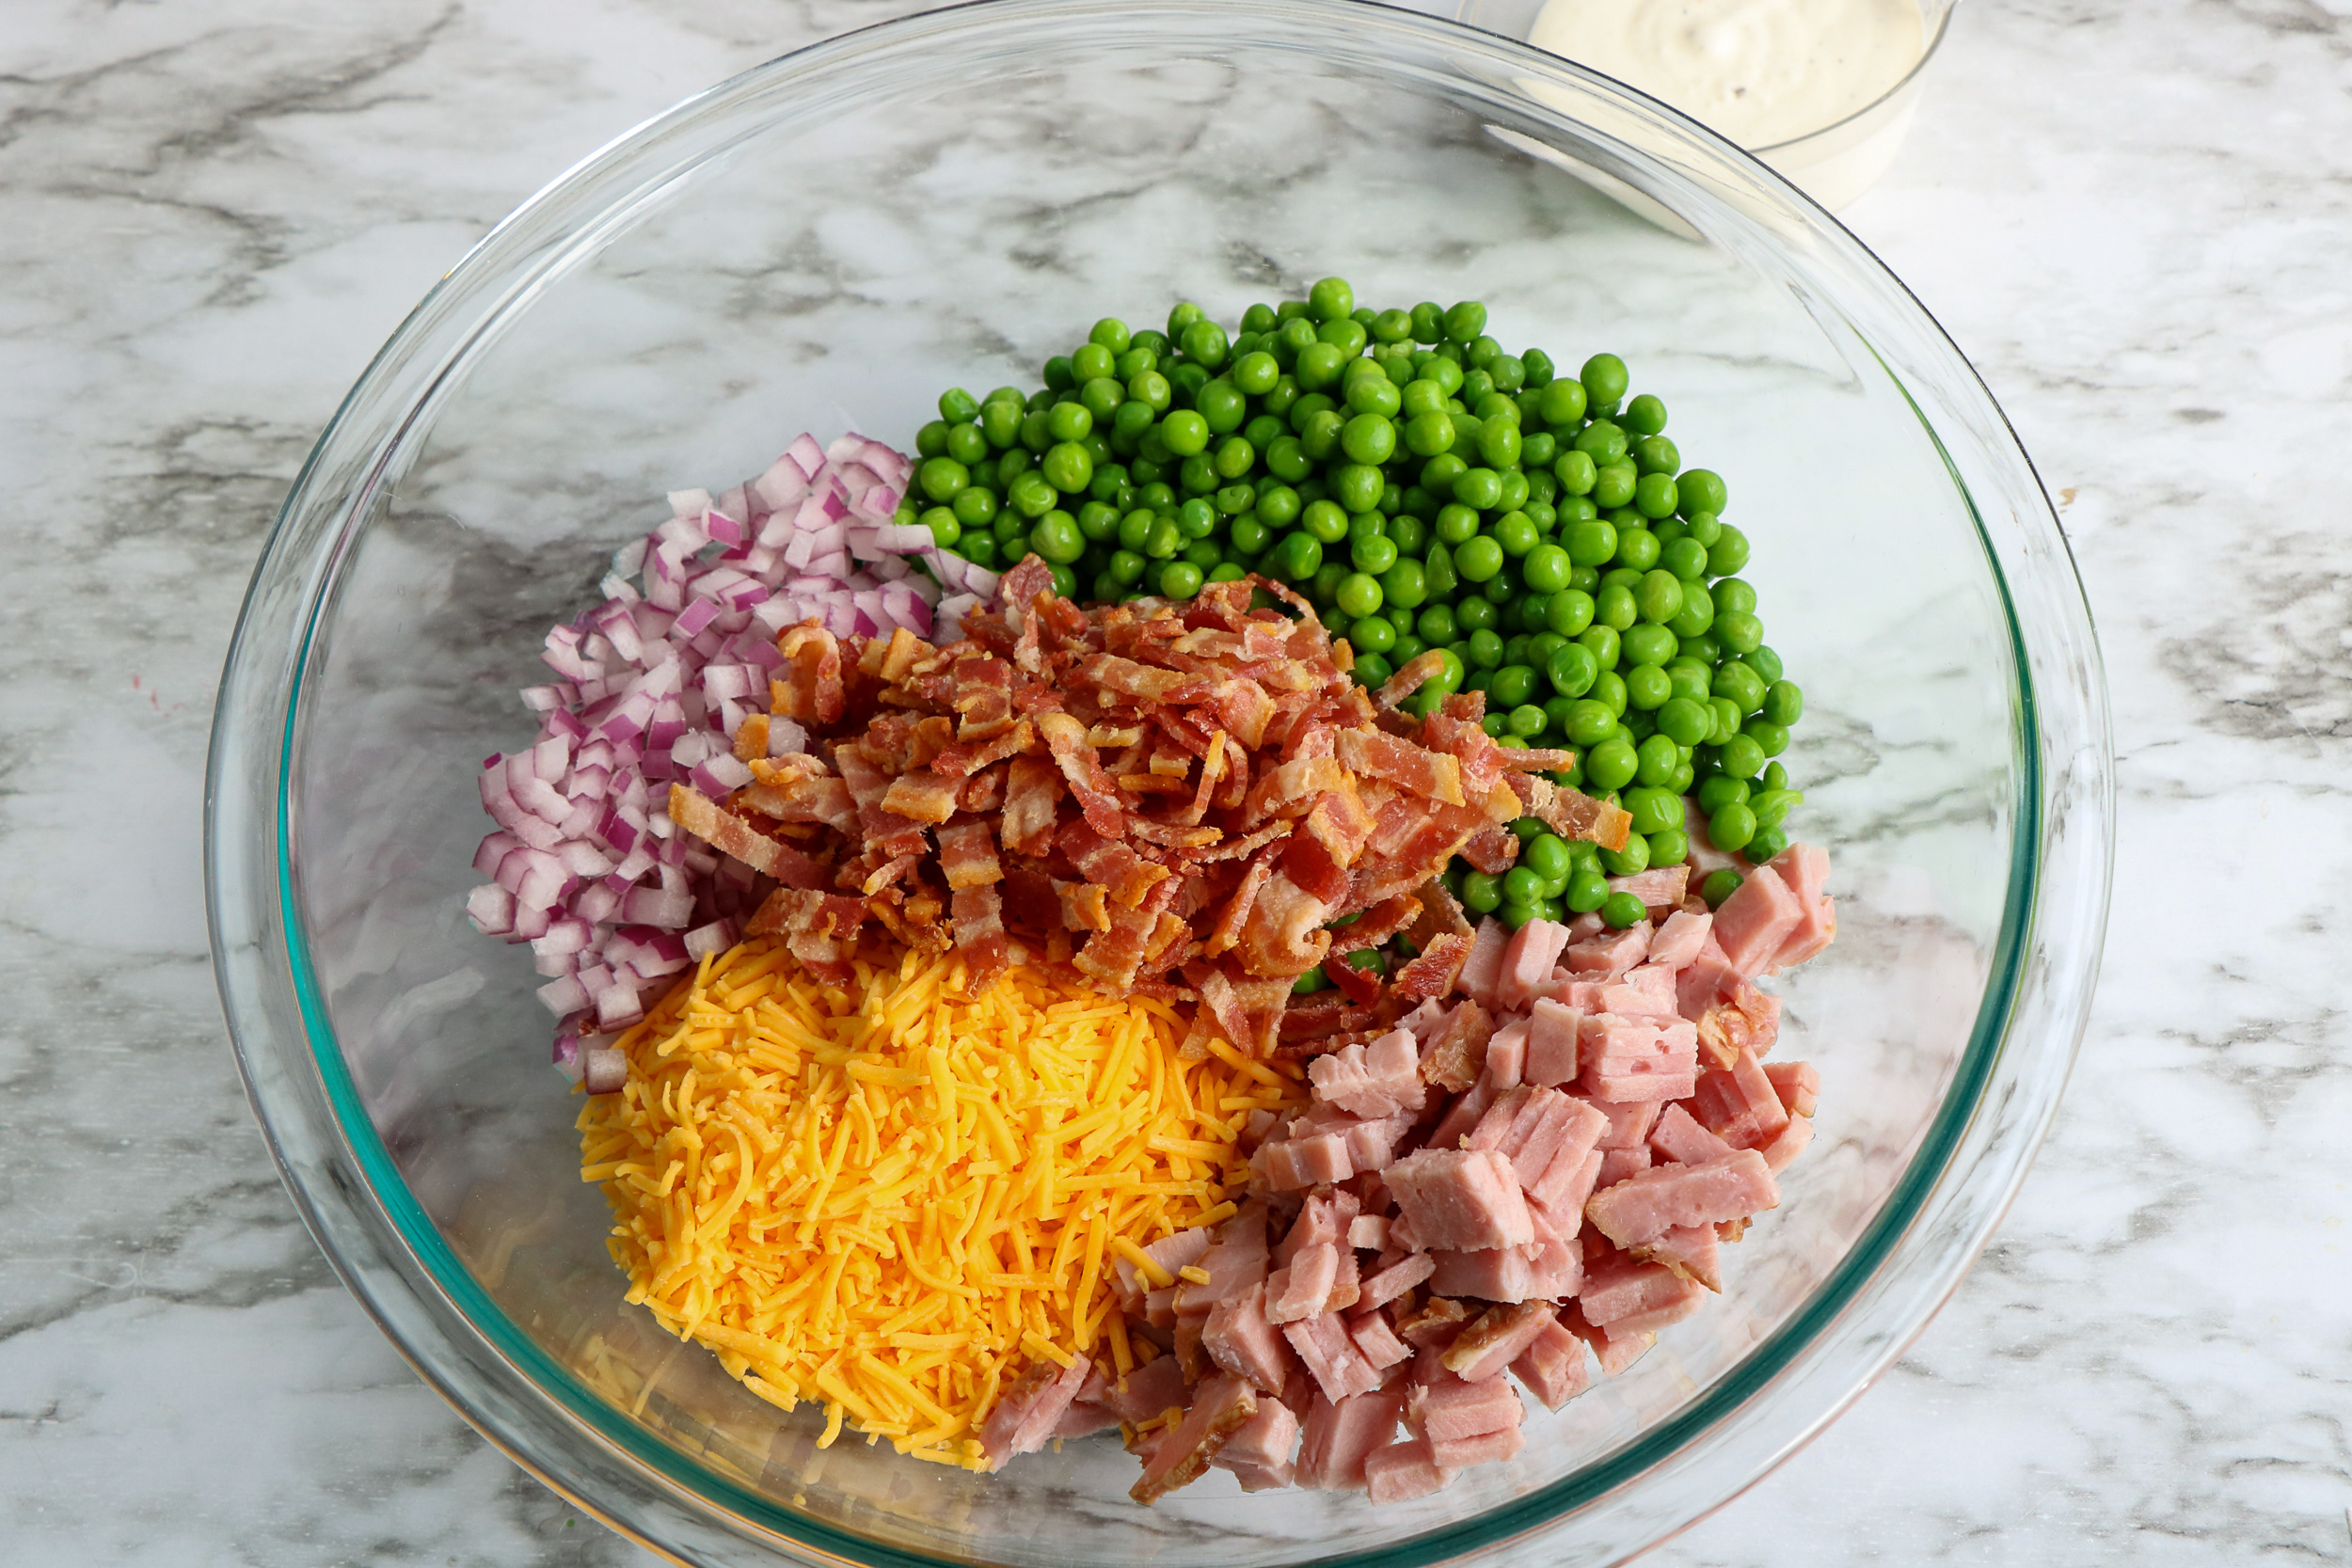 ingredients for pea salad in a large mixing bowl